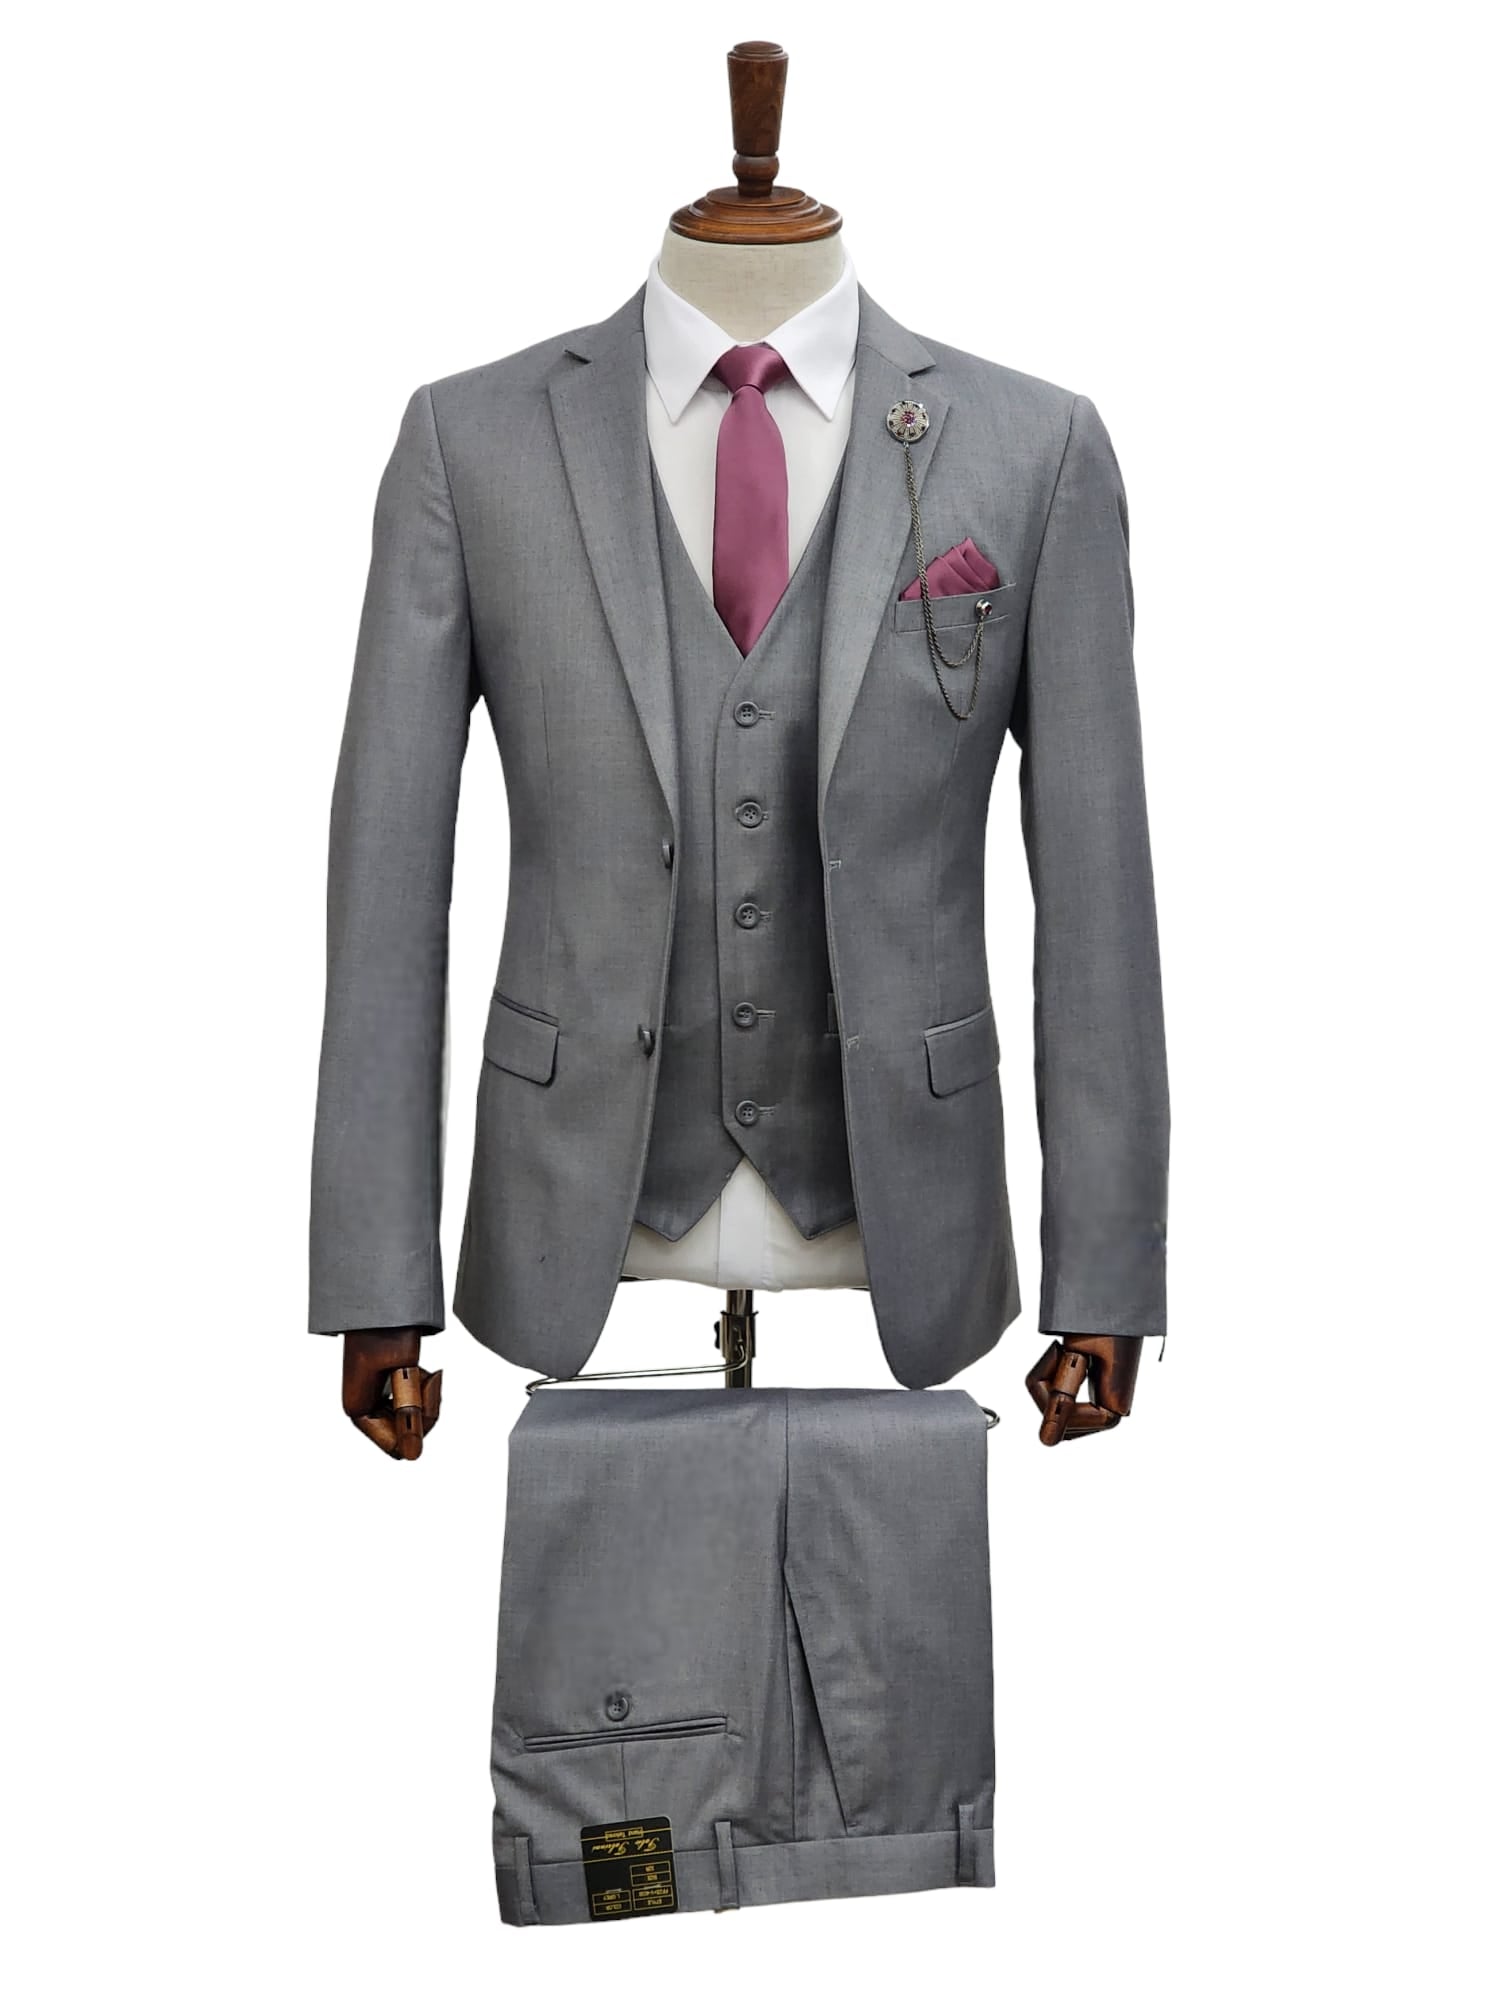 Fabio Fabrini 3 piece Slim Fit Suit, Look sharp for every occaision ...